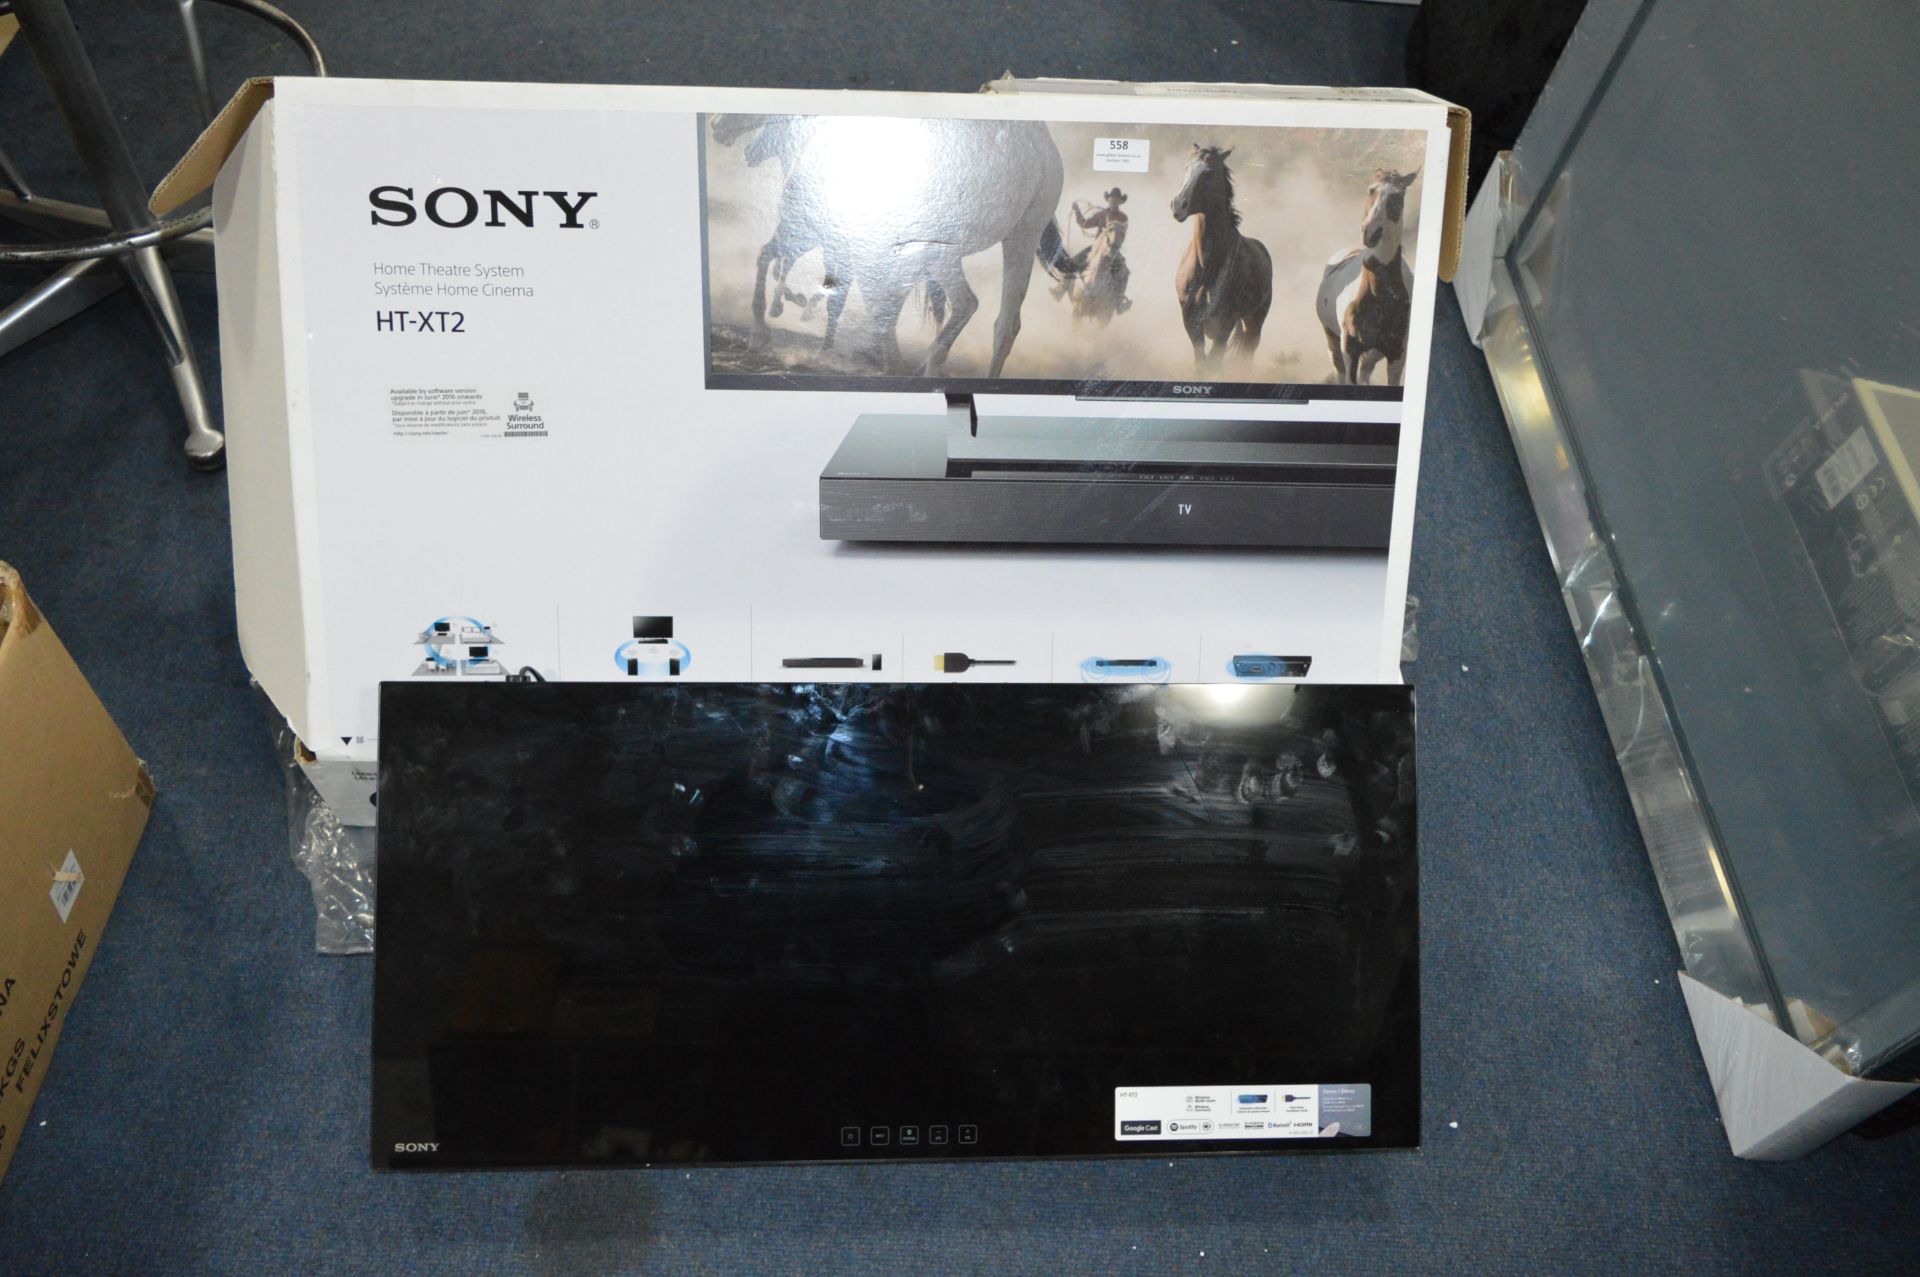 *Sony Home Theater System